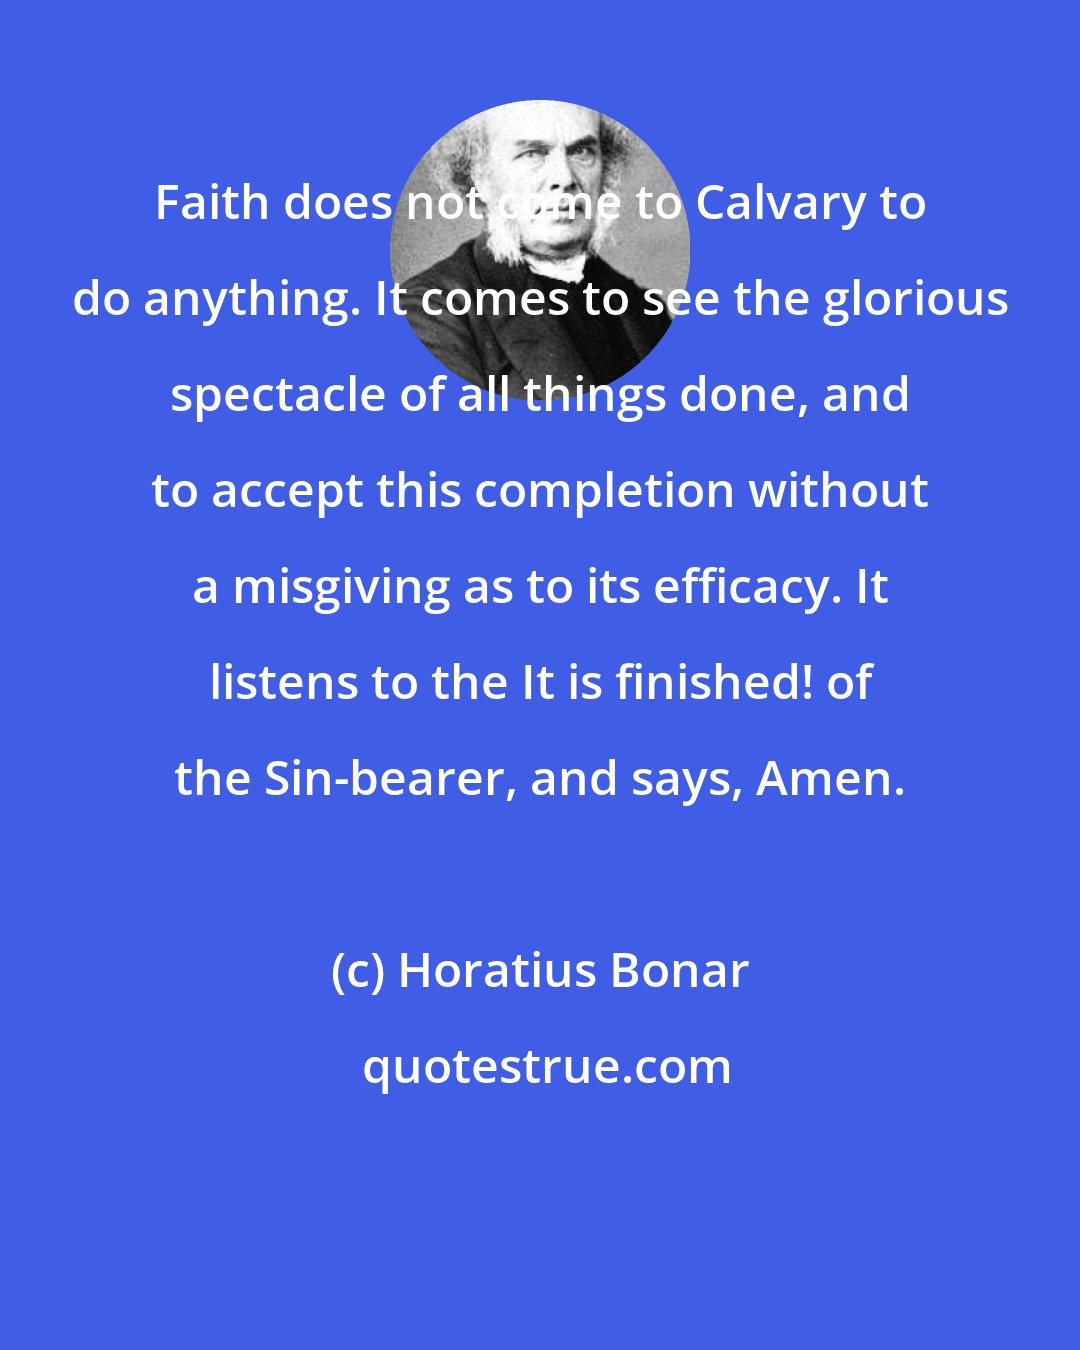 Horatius Bonar: Faith does not come to Calvary to do anything. It comes to see the glorious spectacle of all things done, and to accept this completion without a misgiving as to its efficacy. It listens to the It is finished! of the Sin-bearer, and says, Amen.